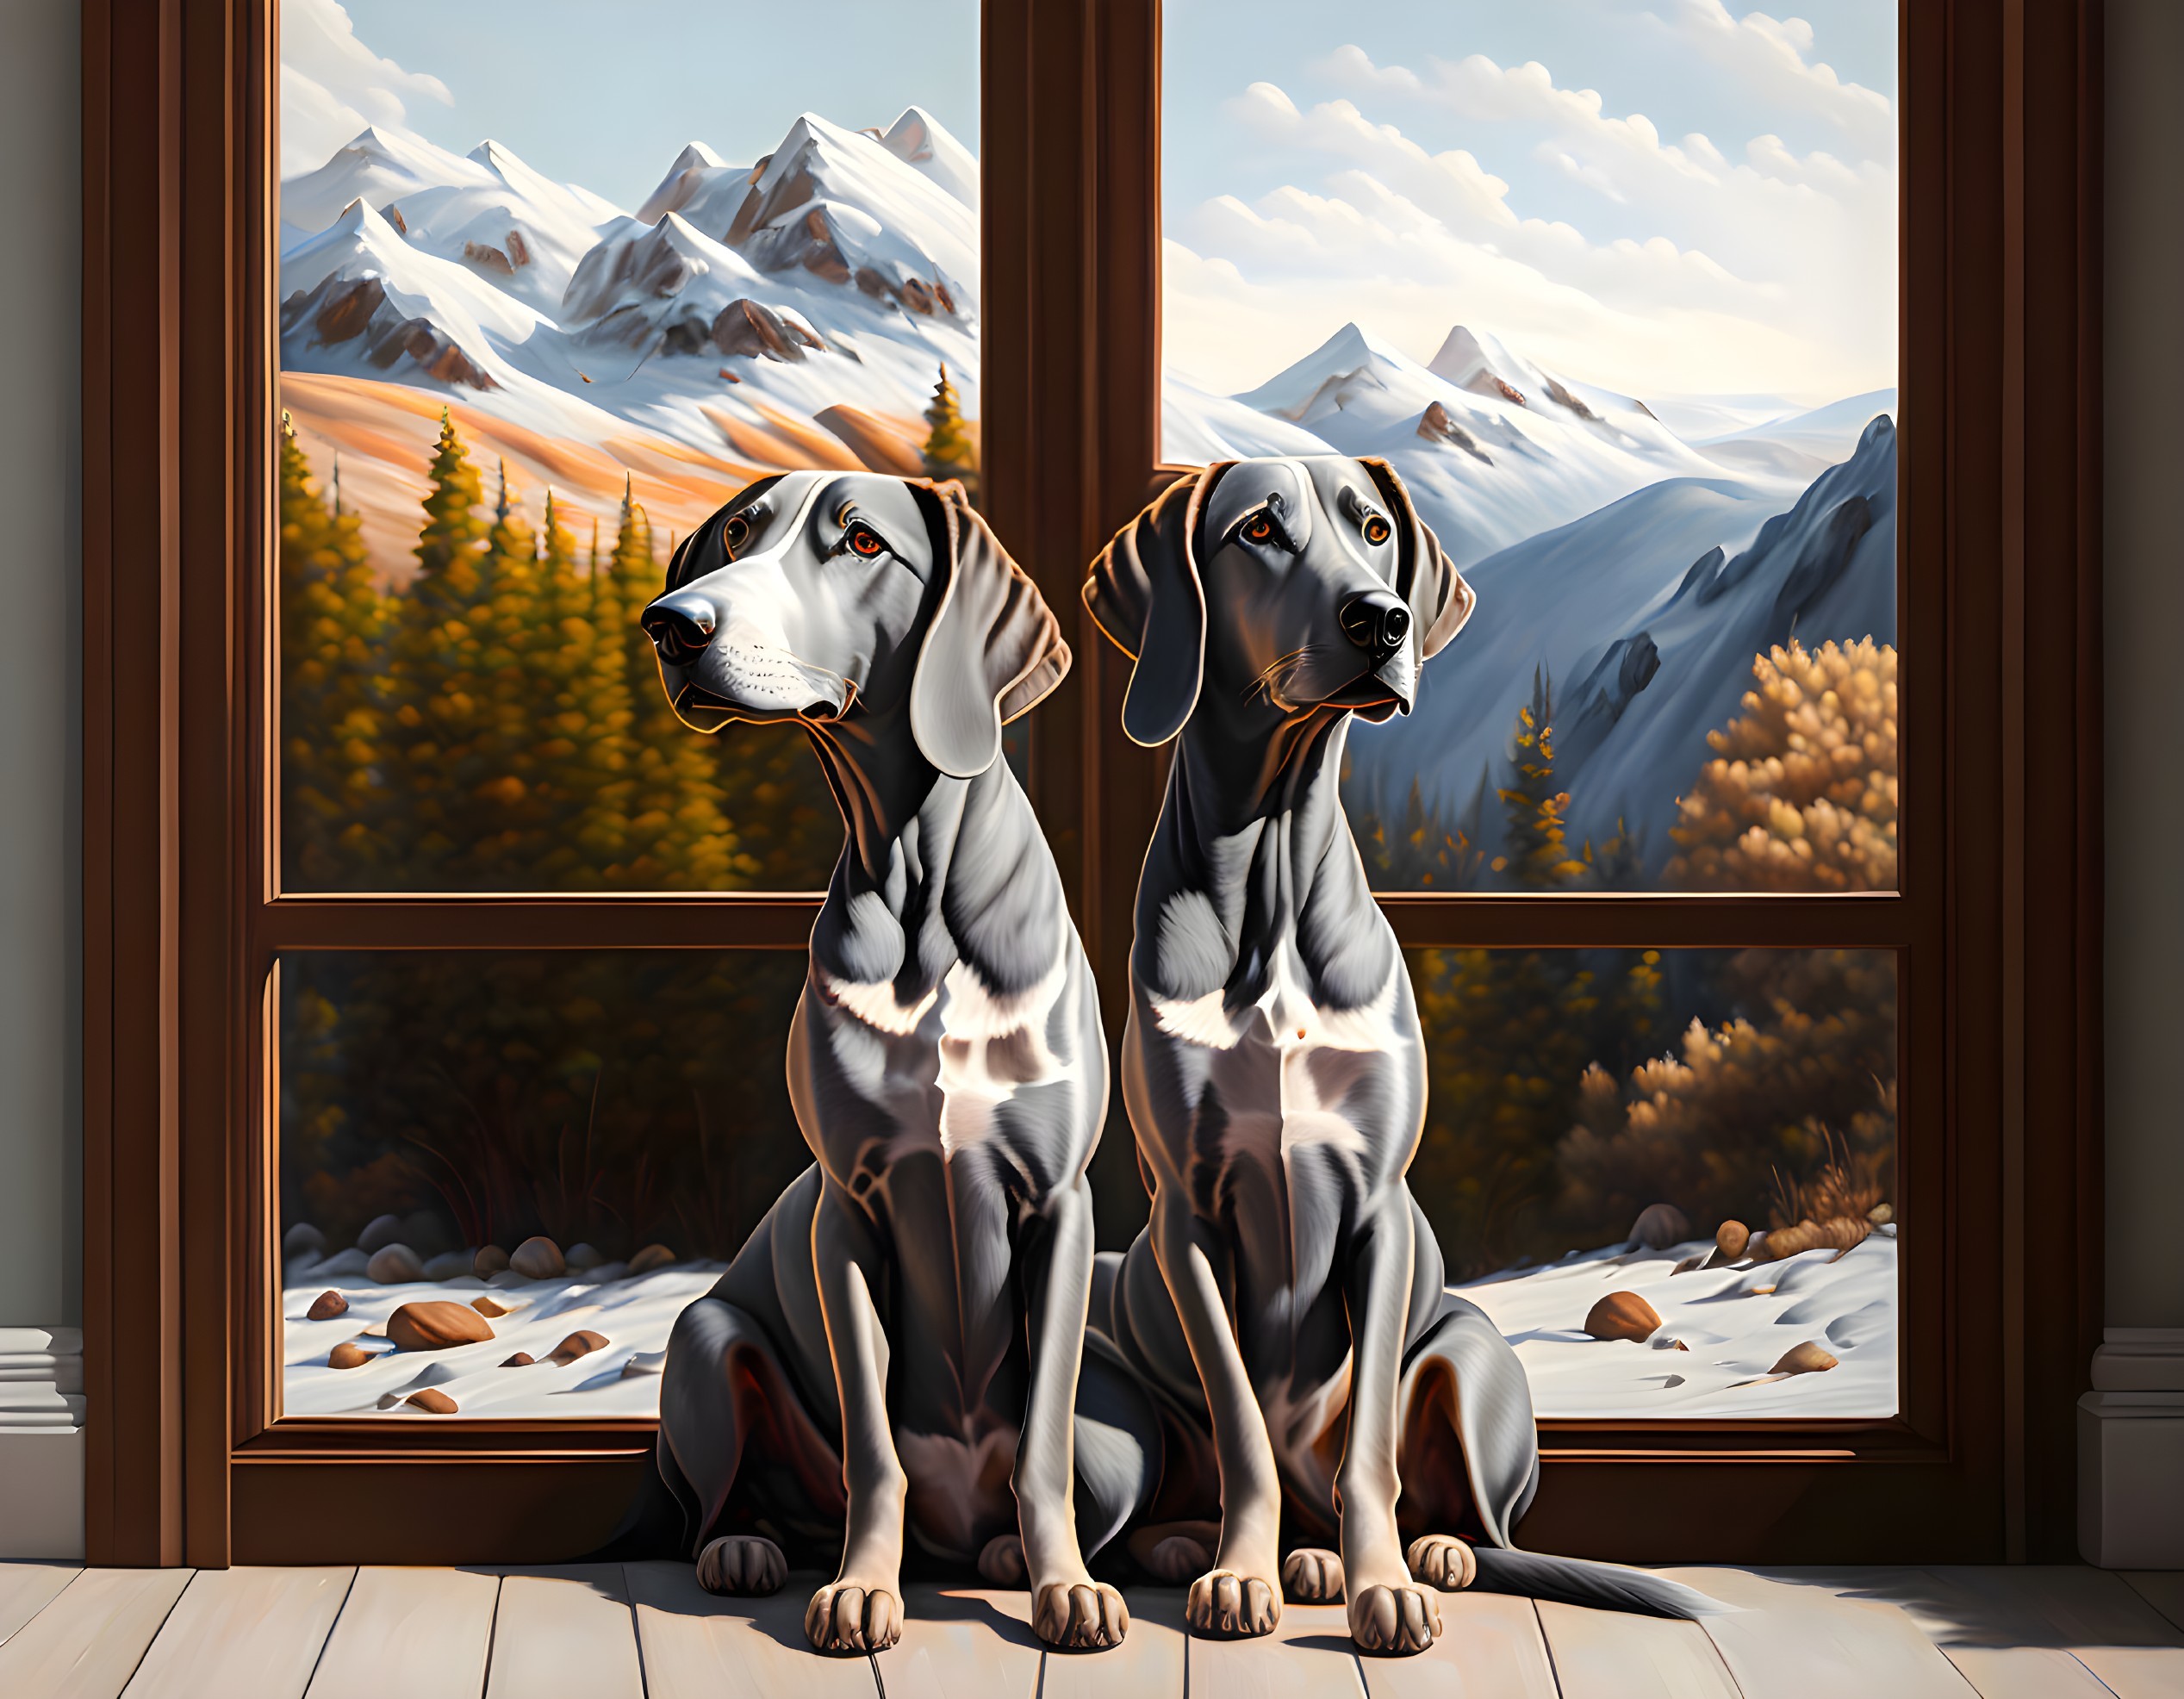 Two dogs by an open window overlooking mountains and forest.